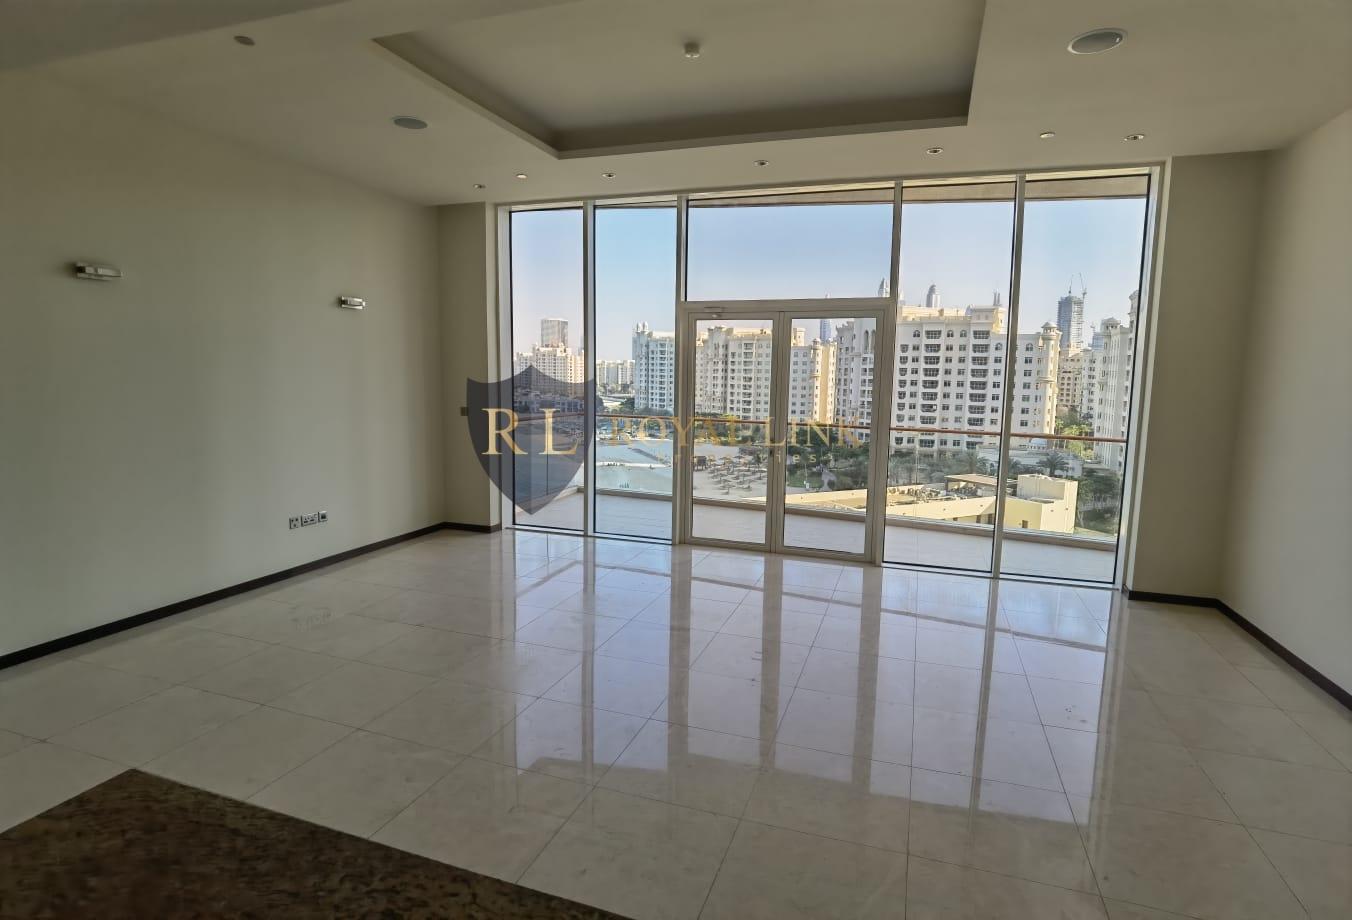 2 bed, 2 bath Apartment for rent in Amber, Tiara Residences, Palm Jumeirah, Dubai for price AED 250000 yearly 